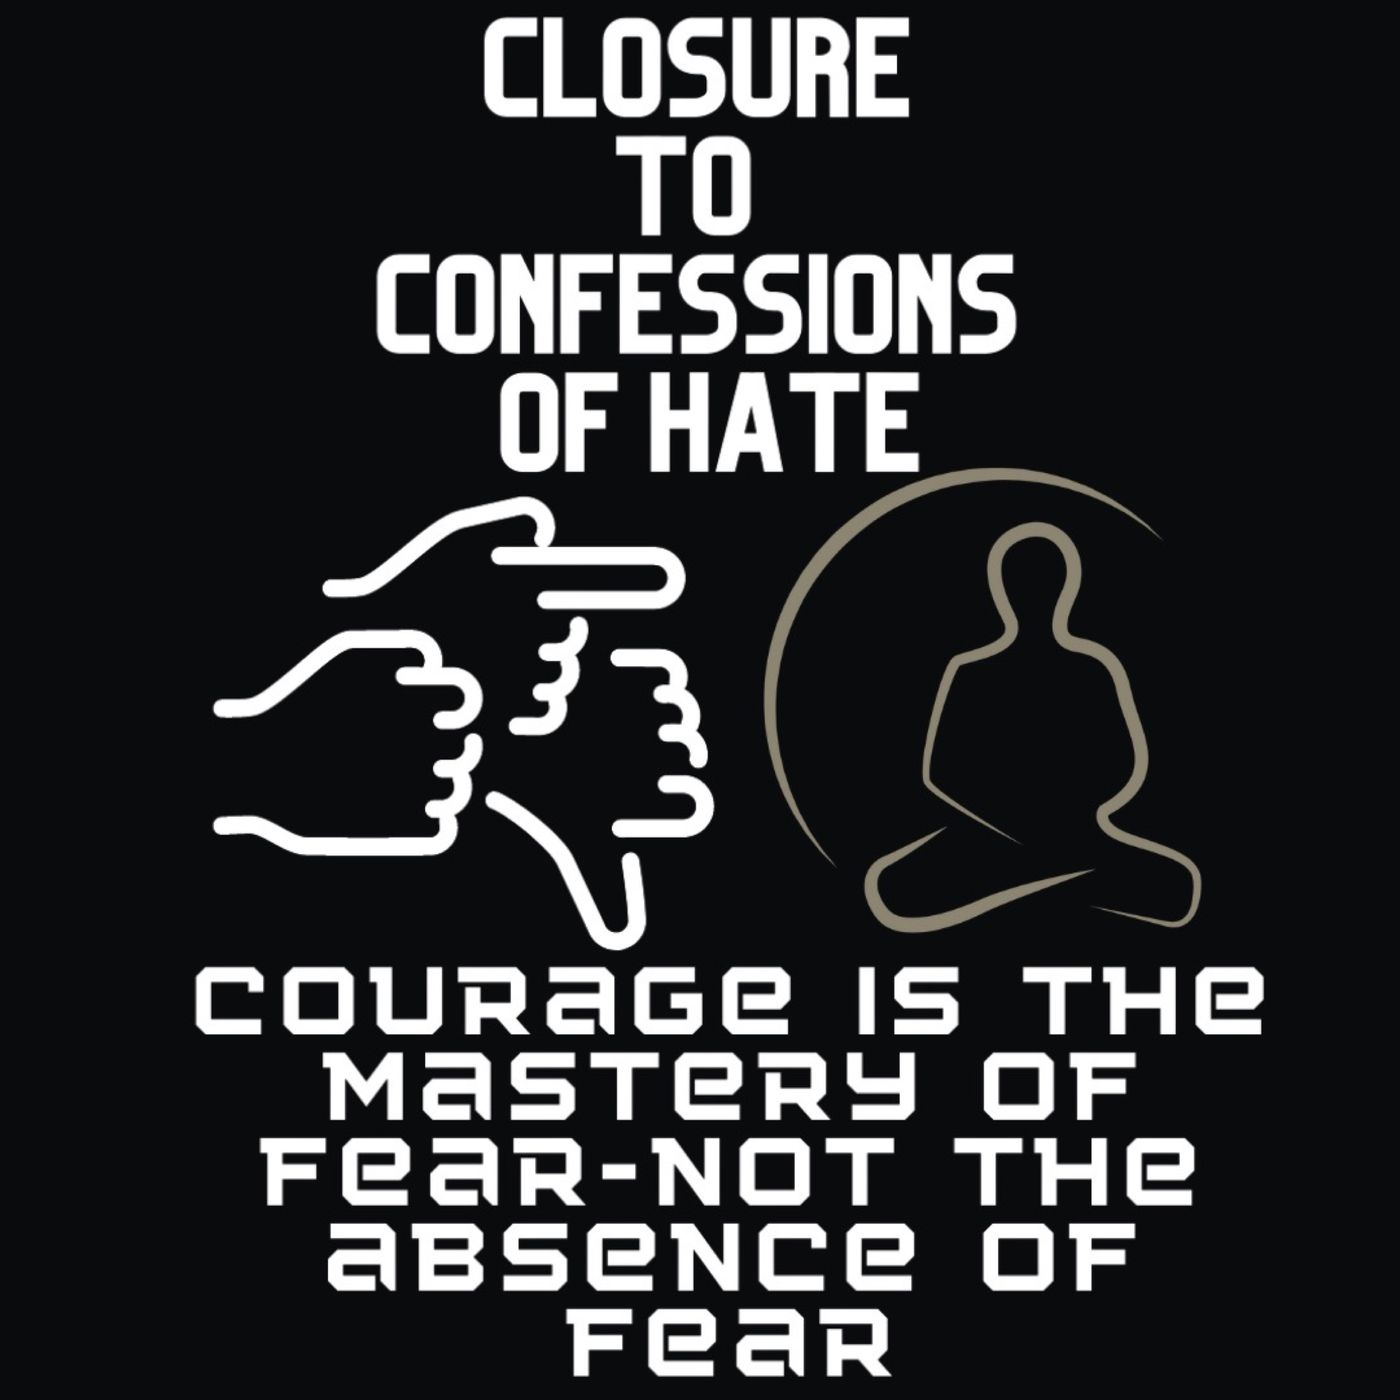 Closure to Confessions of Hate